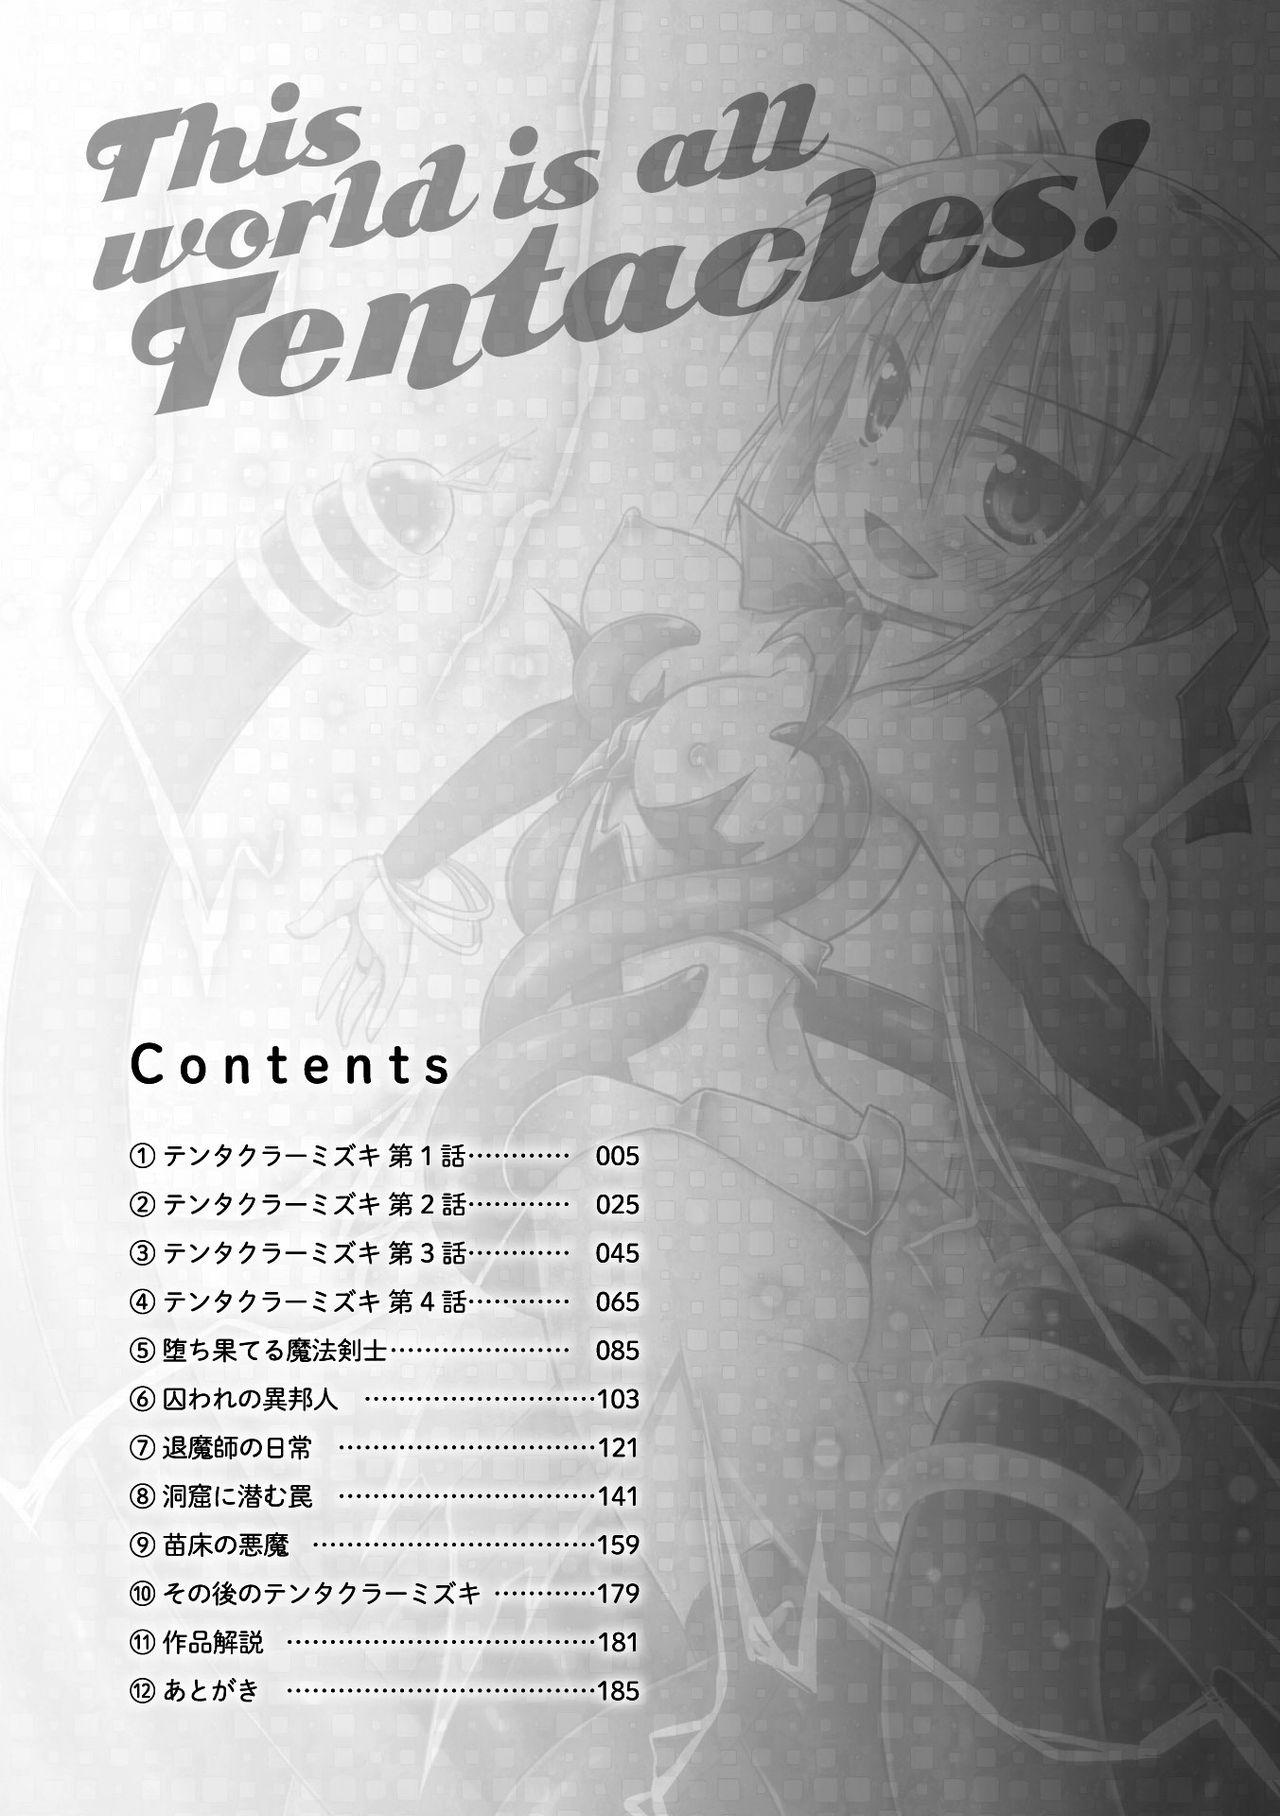 Cop This World is all Tentacles | Konoyo wa Subete Tentacle! Special Locations - Page 4